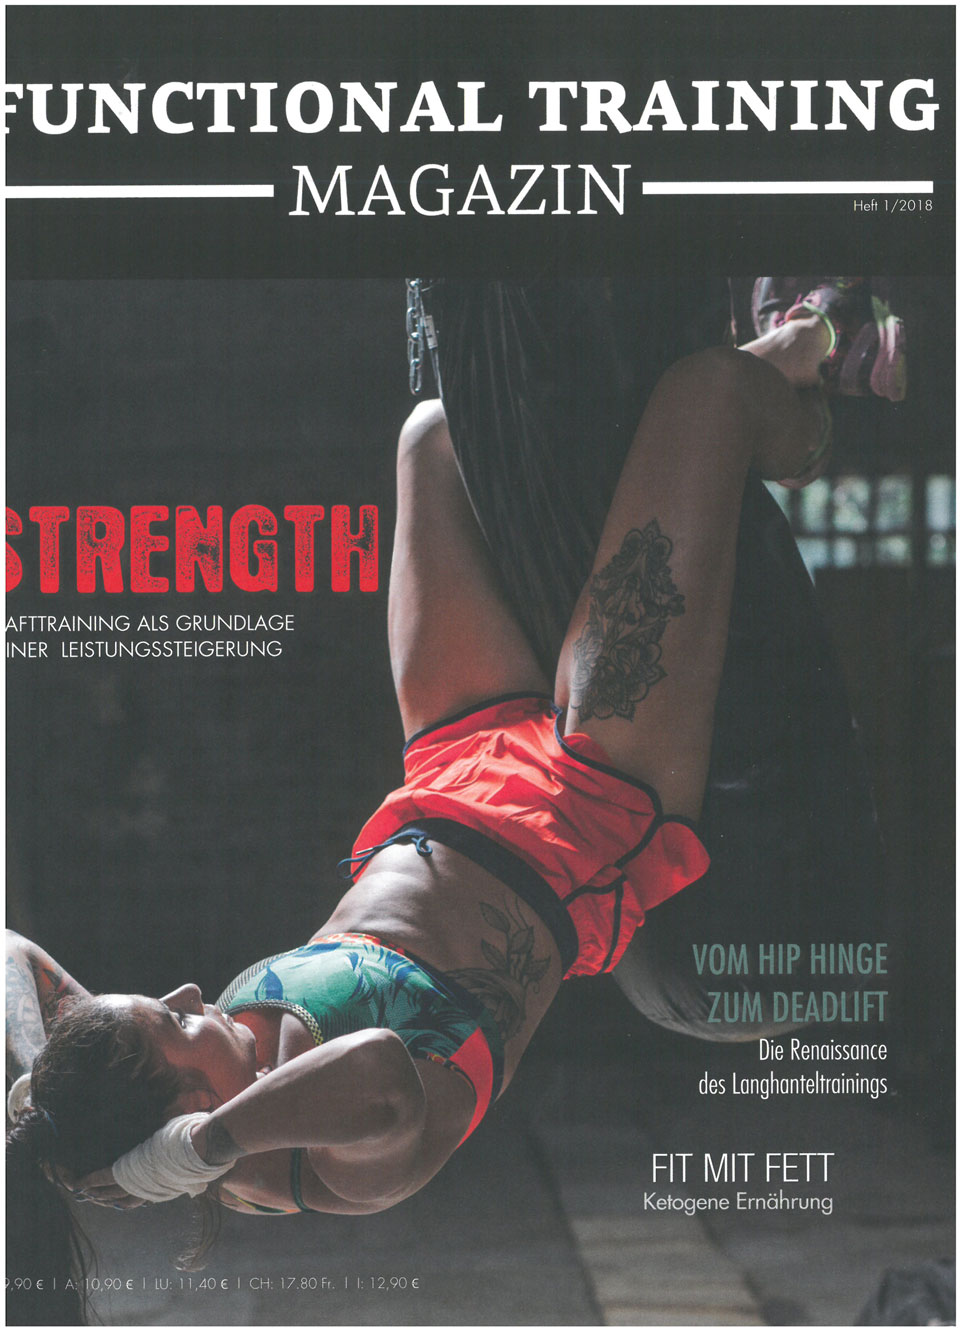 Cover - functional training